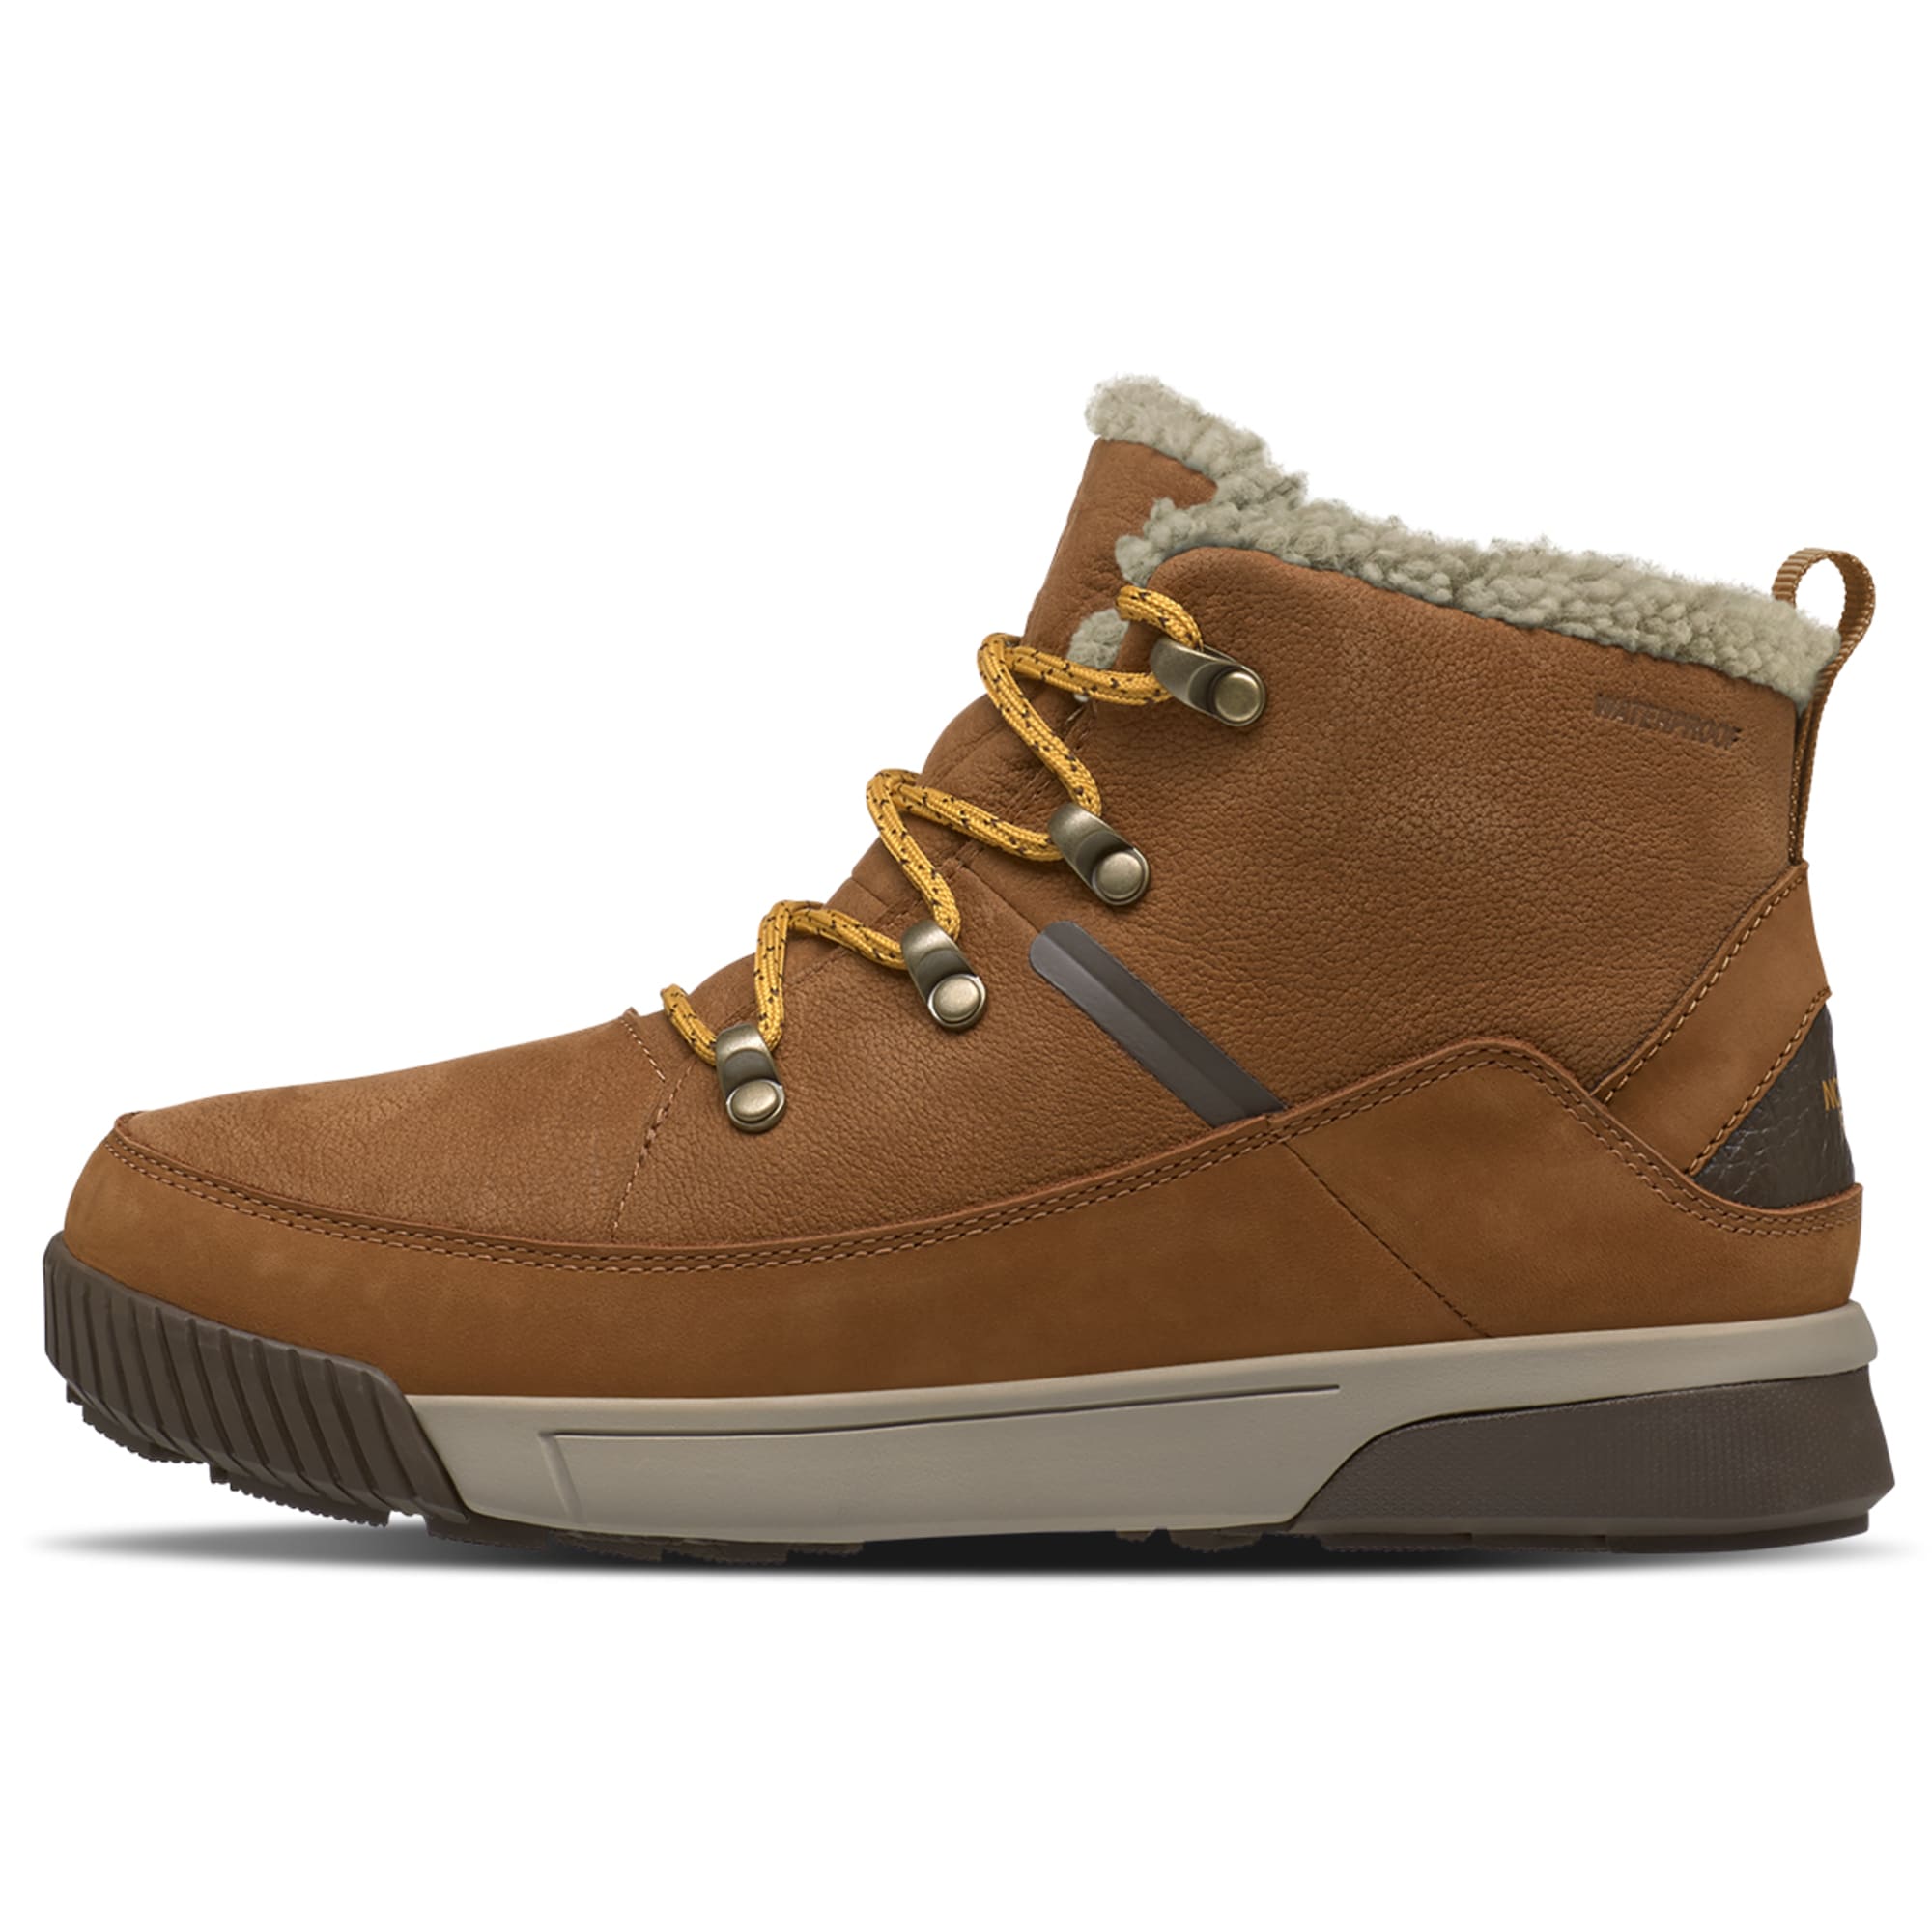 THE NORTH FACE Women’s Sierra Mid Lace Waterproof Boots